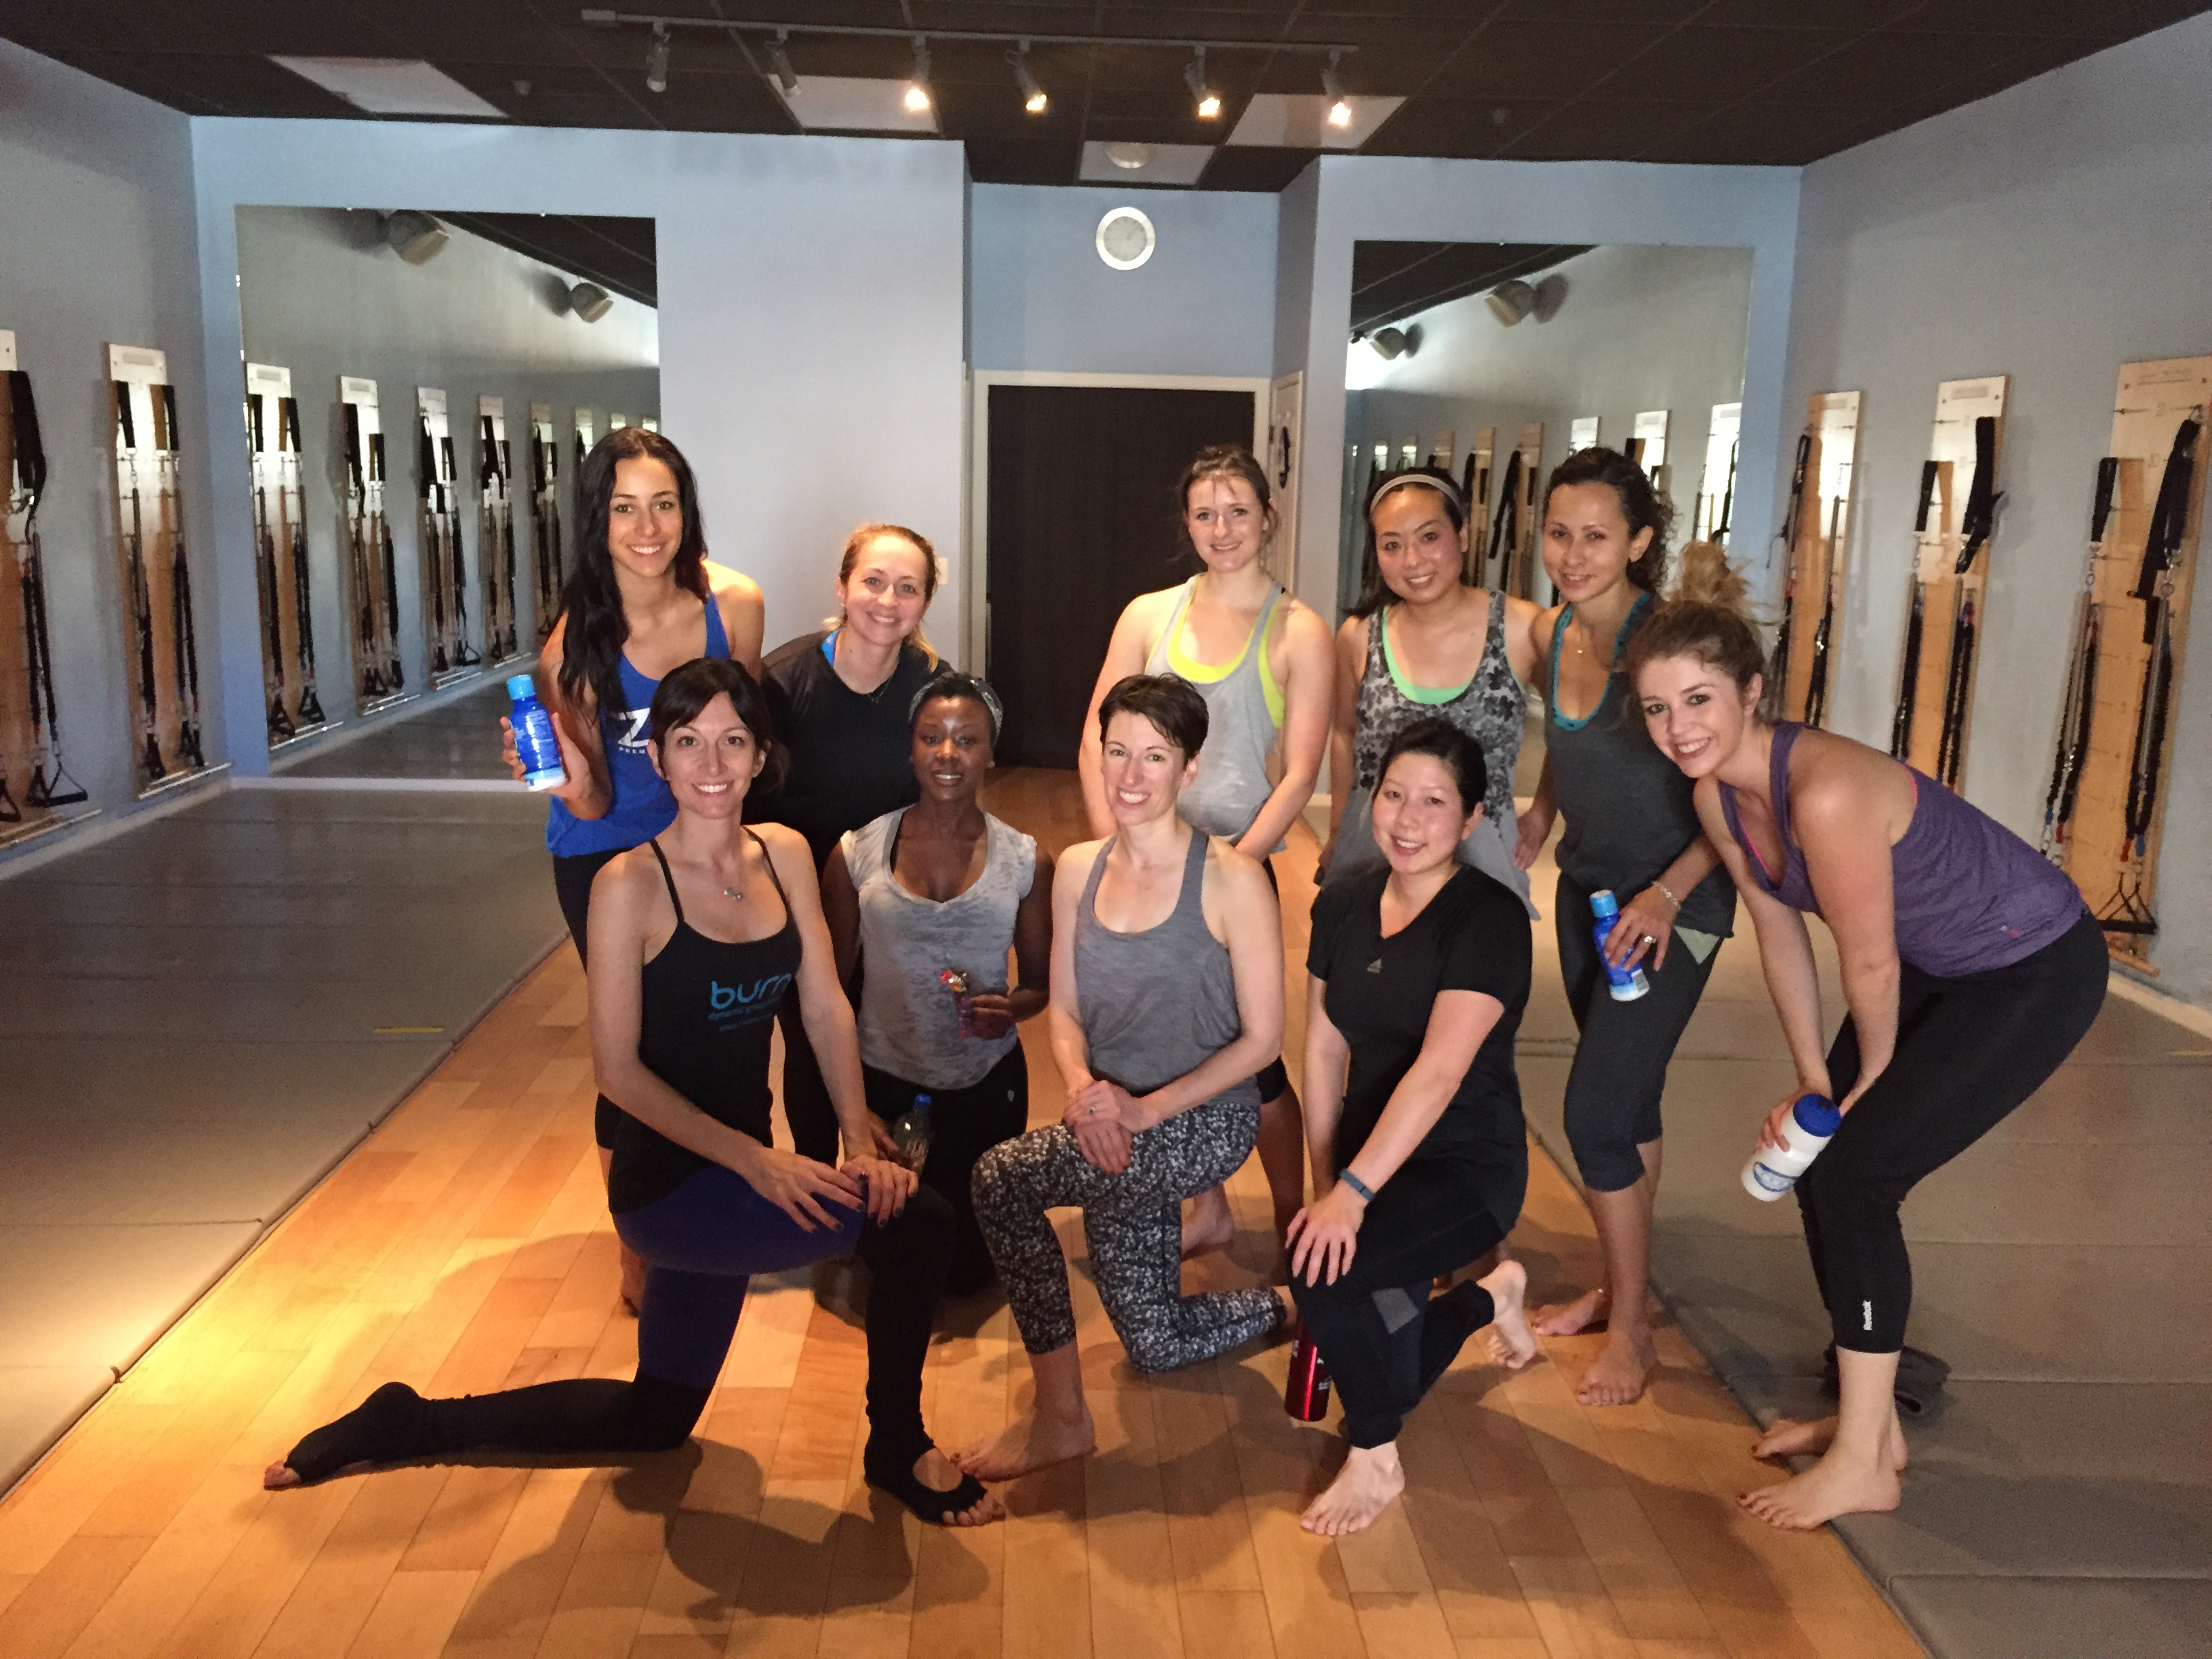 Lisa Corsello (bottom left) with some of Saturday's Racked Fit Club participants.